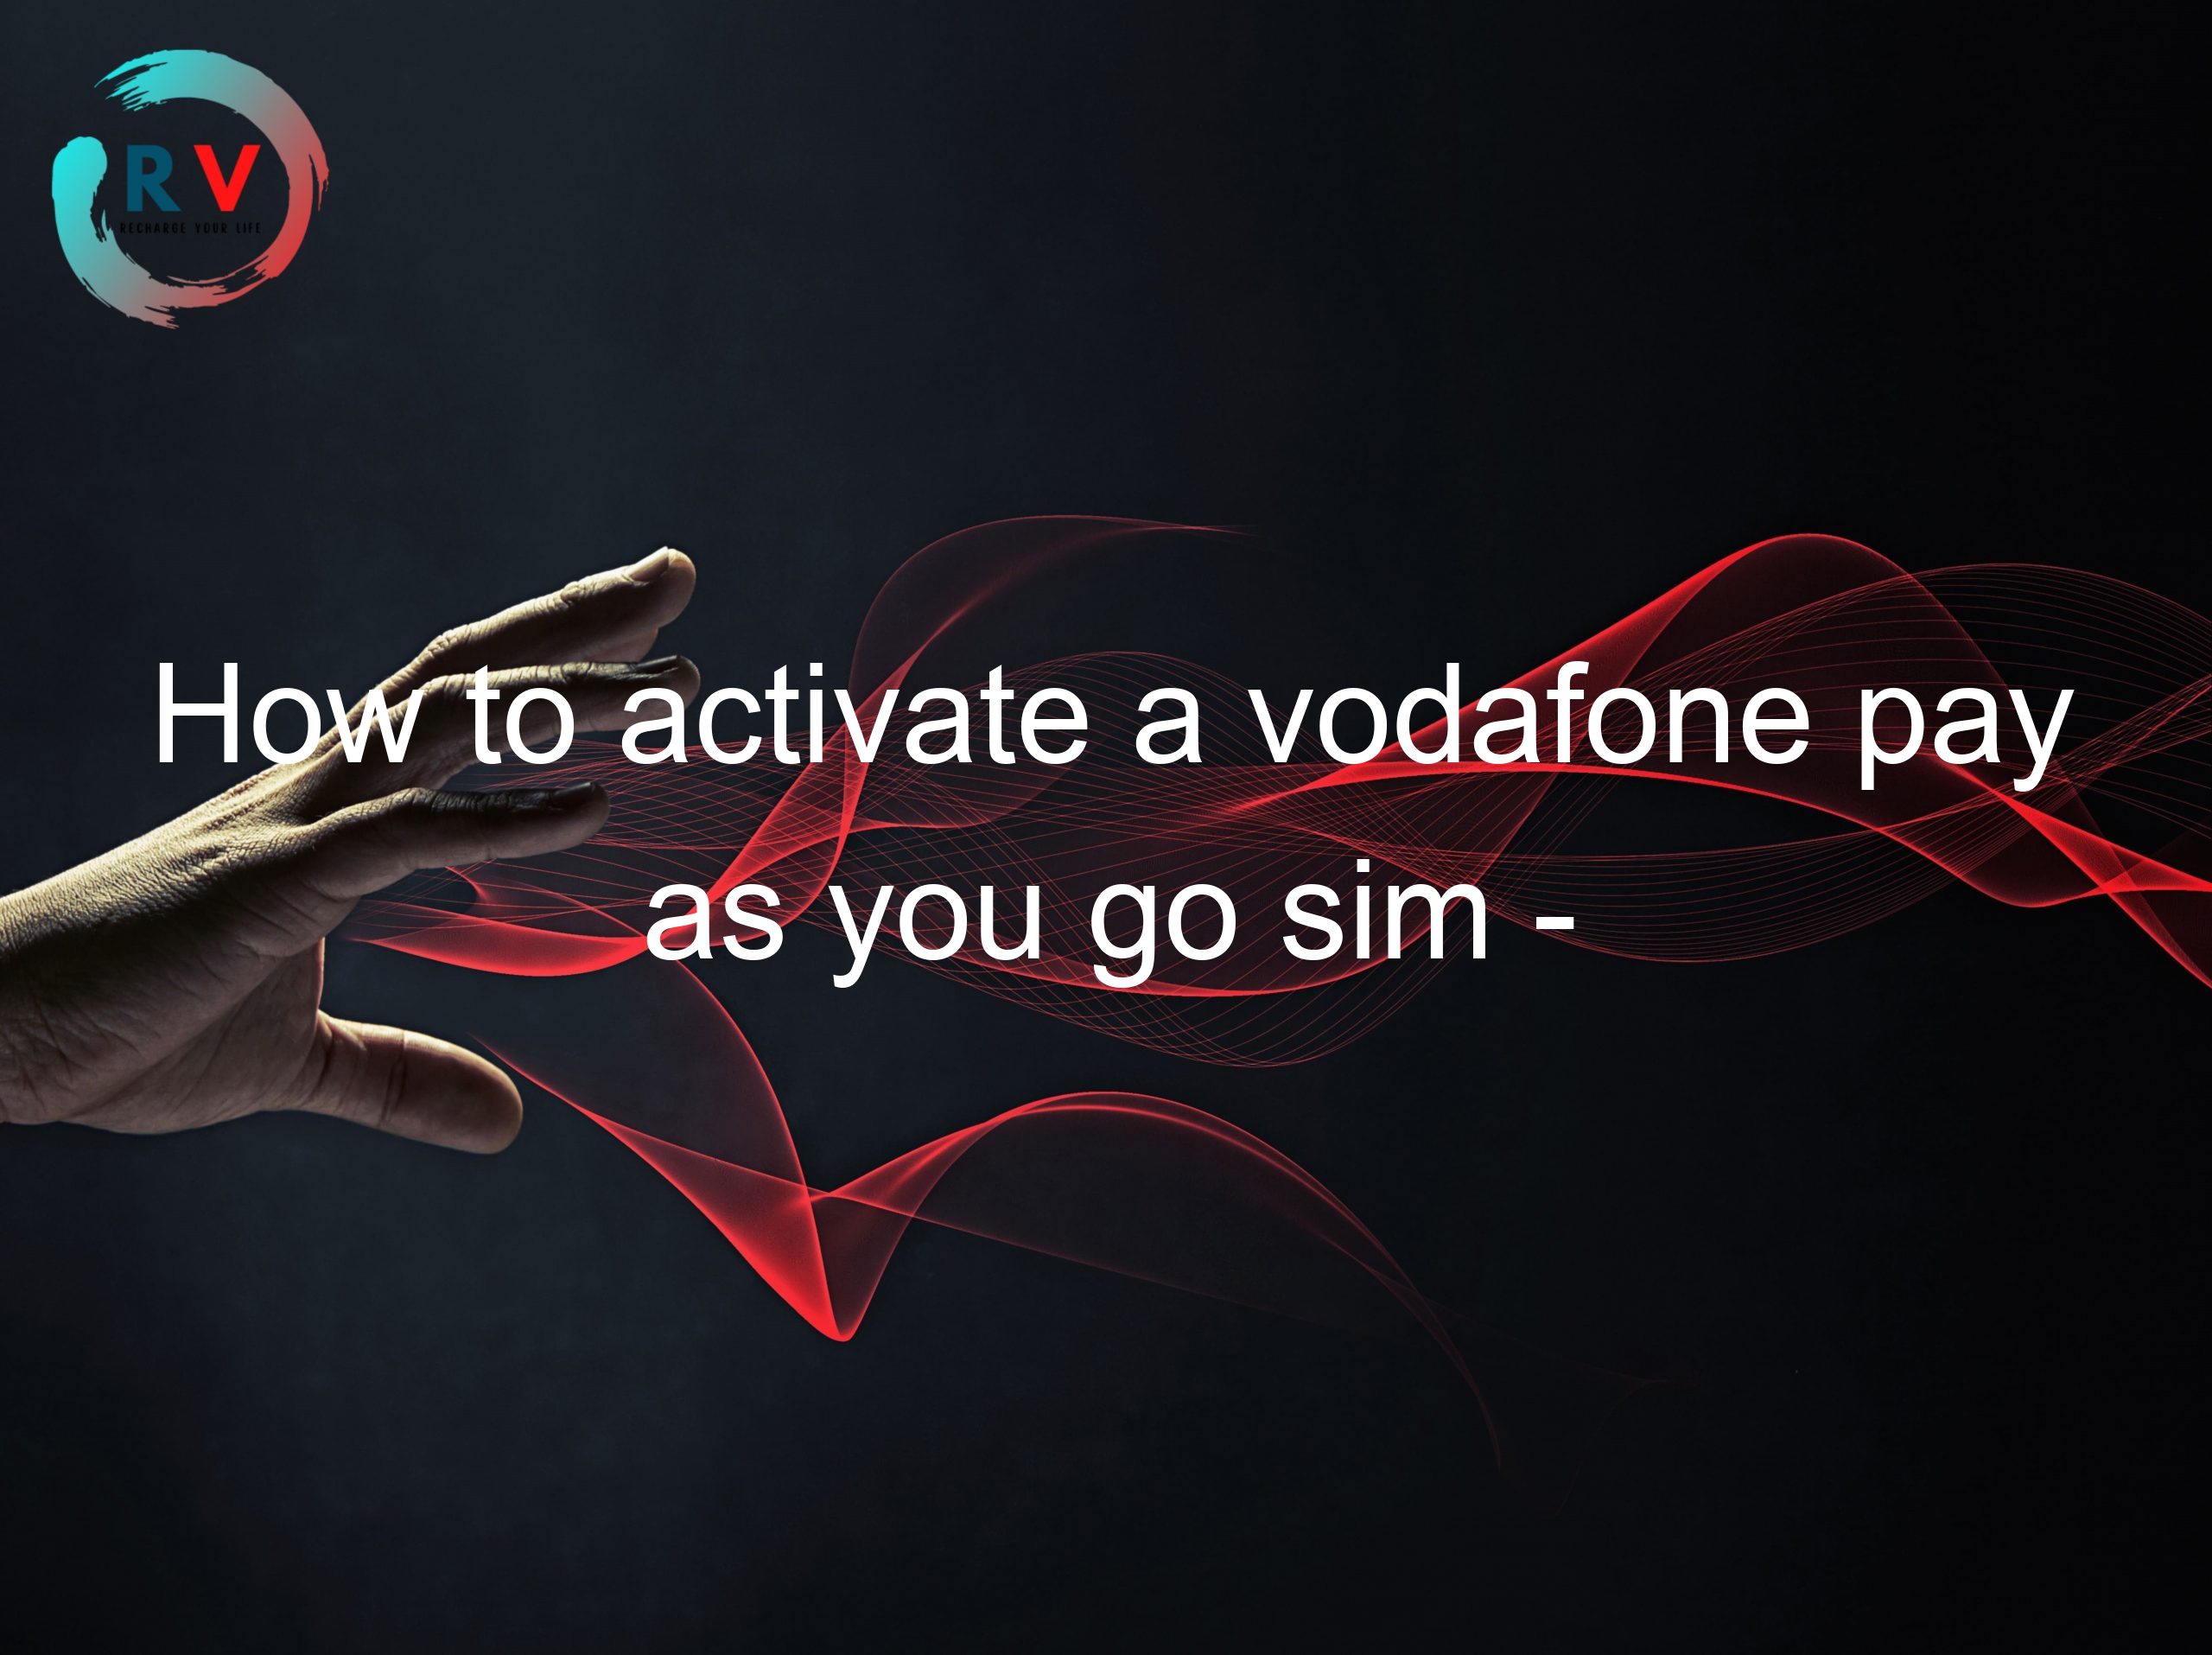 How to activate a vodafone pay as you go sim - The ultimate guide